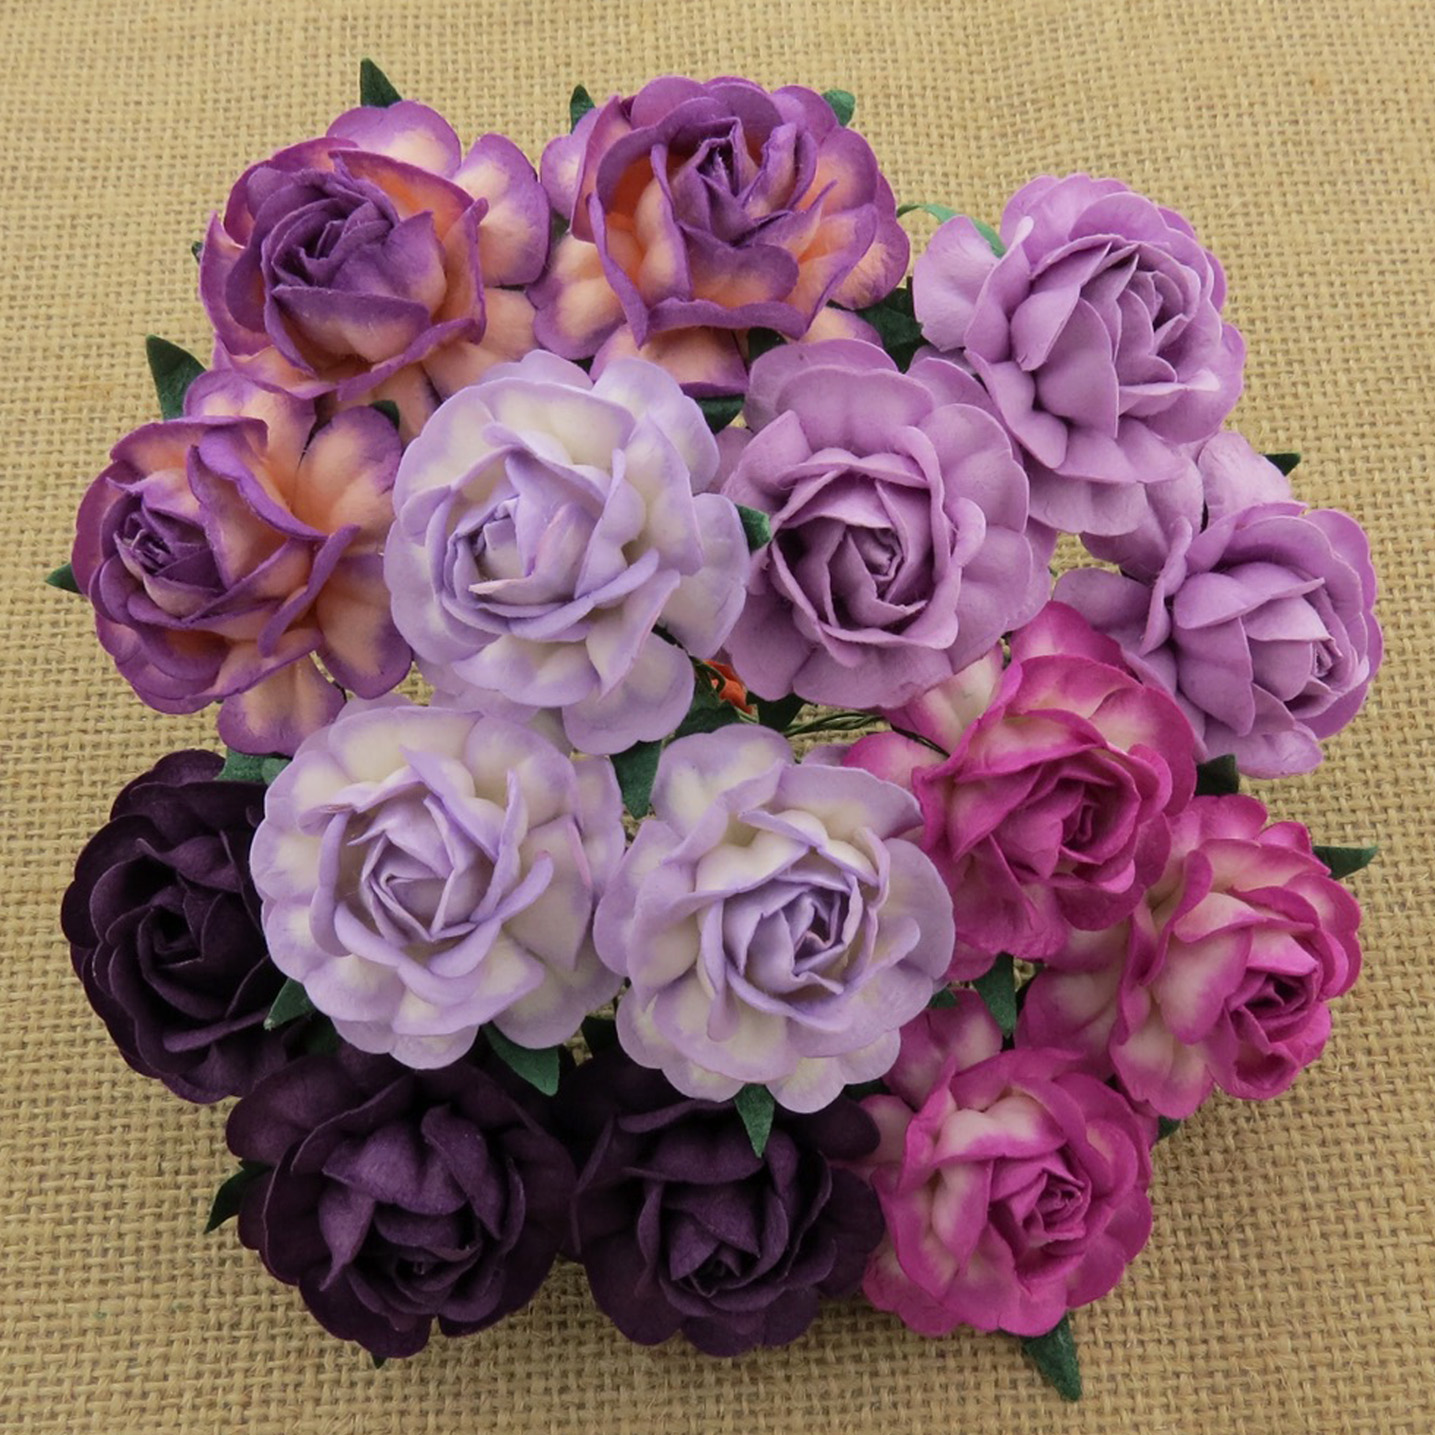 50 MIXED PURPLE/LILAC MULBERRY PAPER TEA ROSES 40mm - 5 COLOR